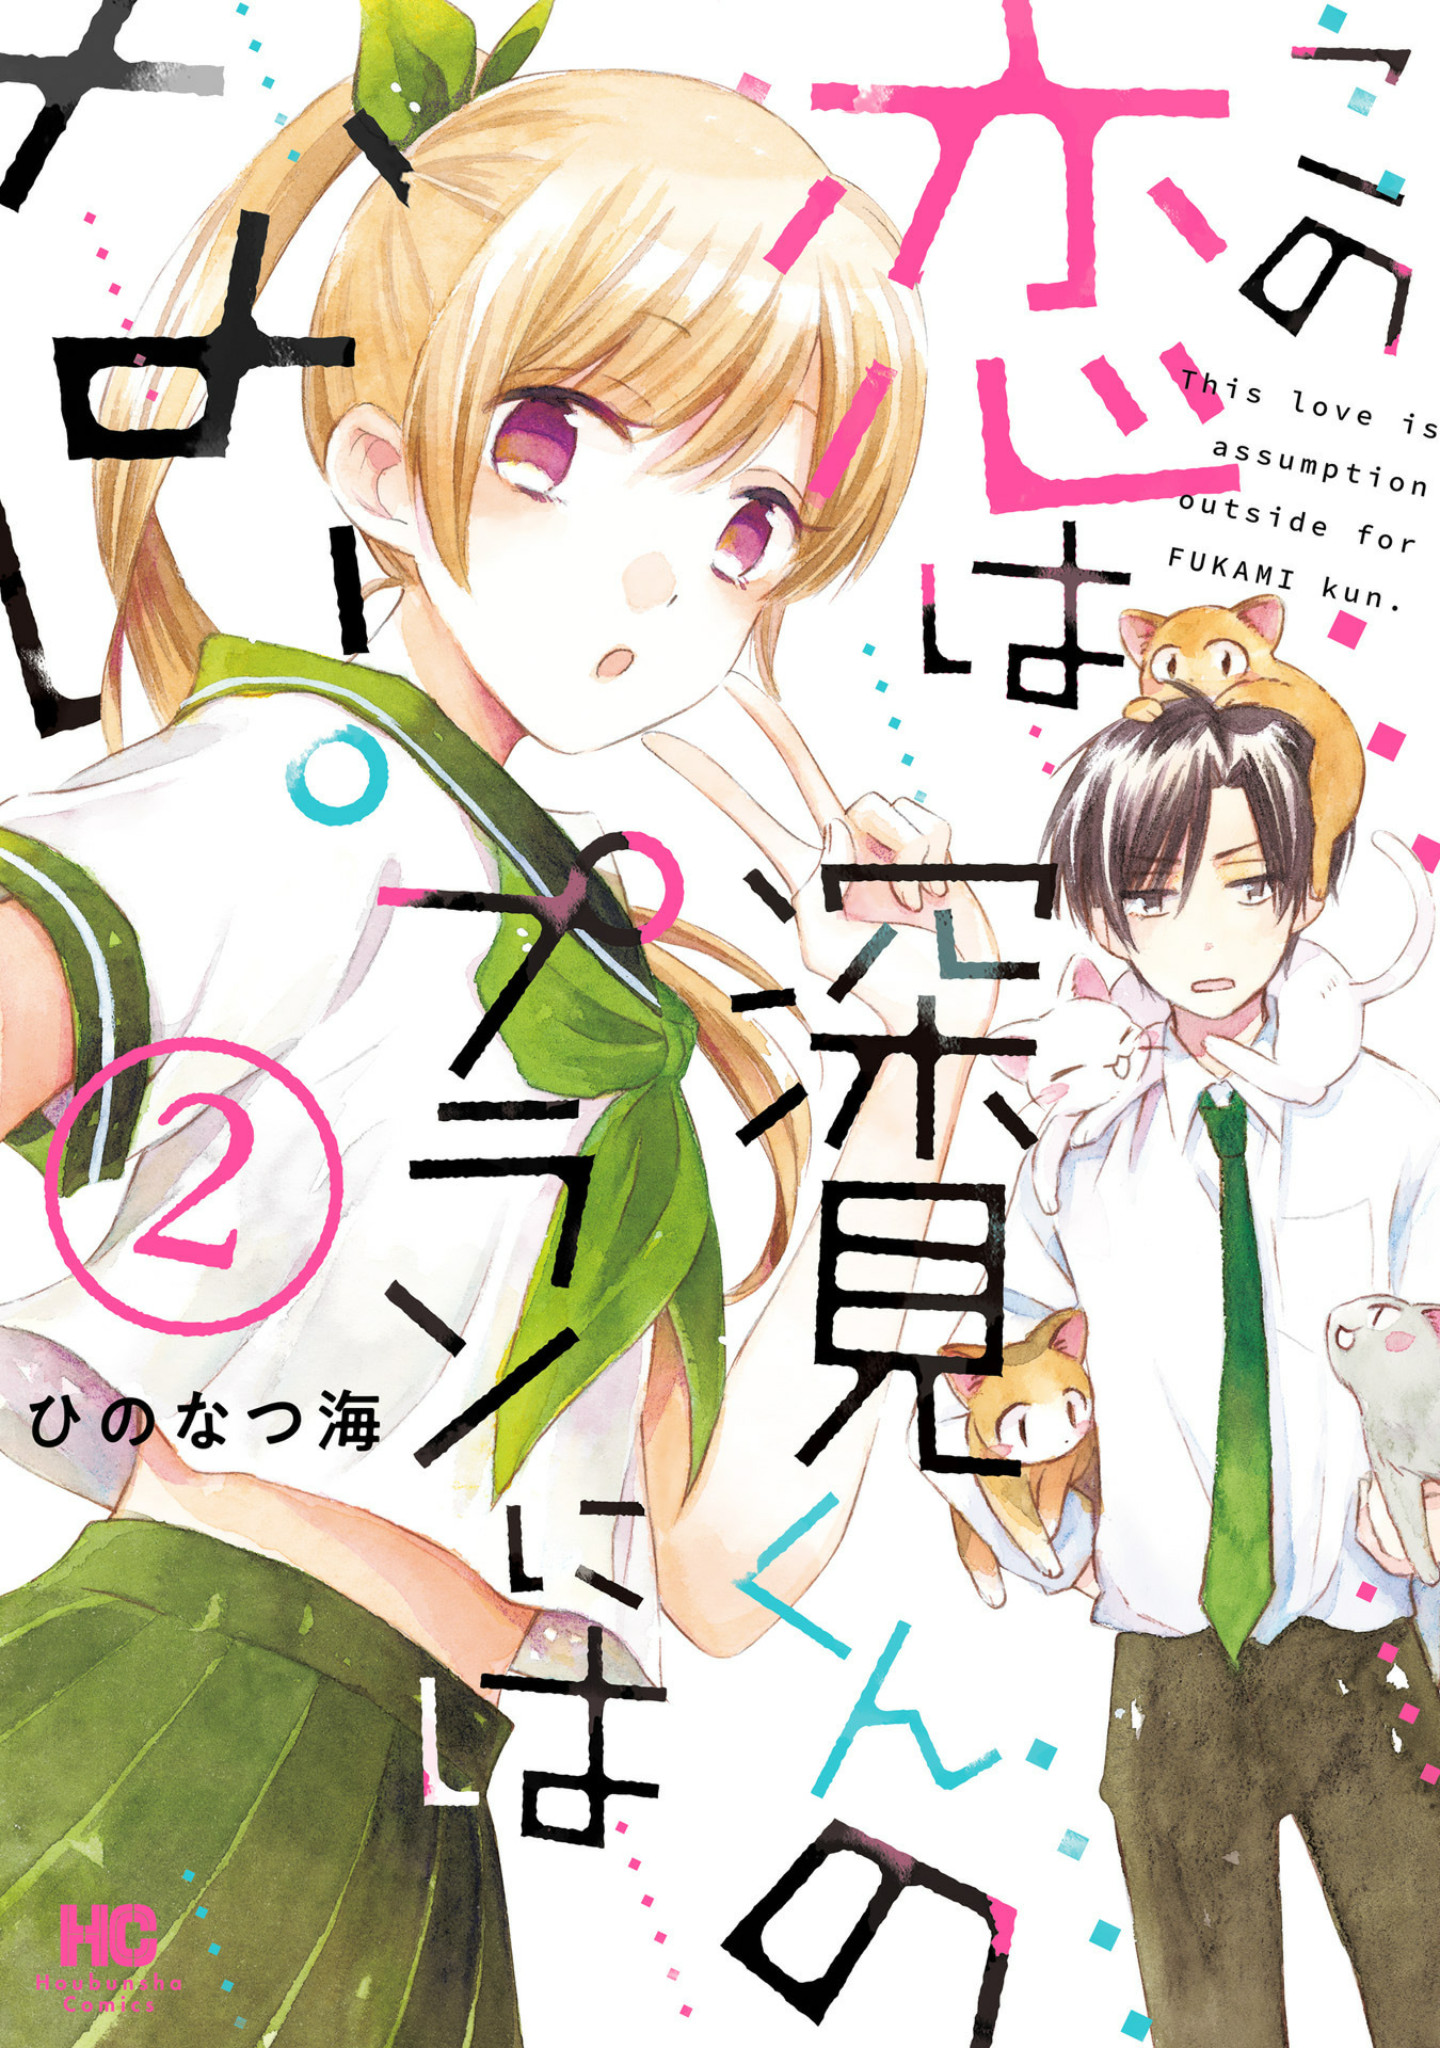 This Love Is Assumption Outside for Fukami Kun Vol.2 Chapter 12